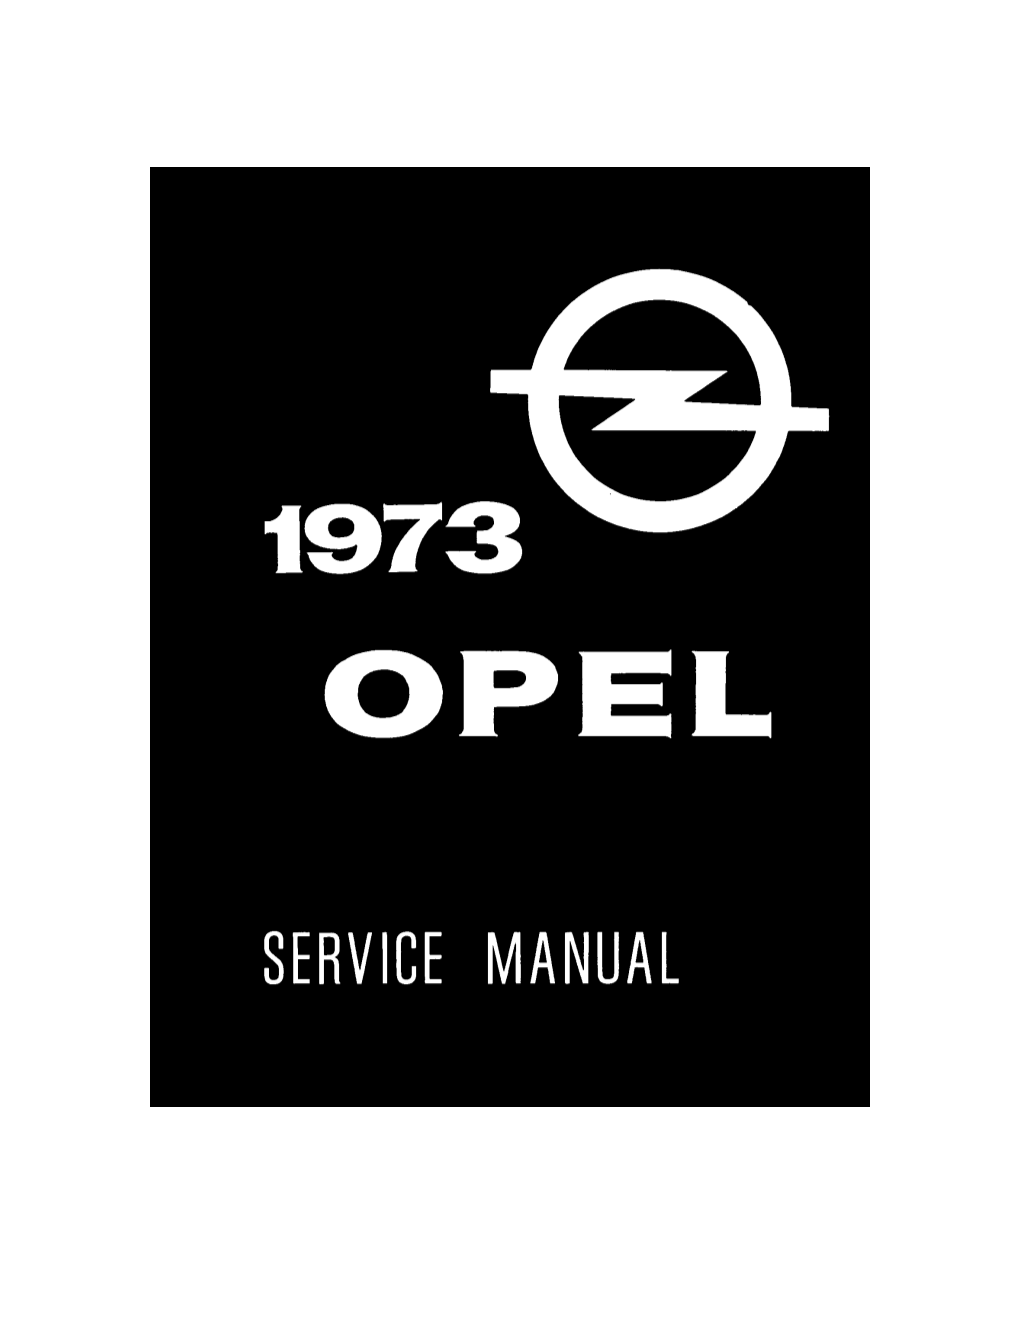 1973 Opel Service Manual Includes Information on the Opel 1900, Manta and GT